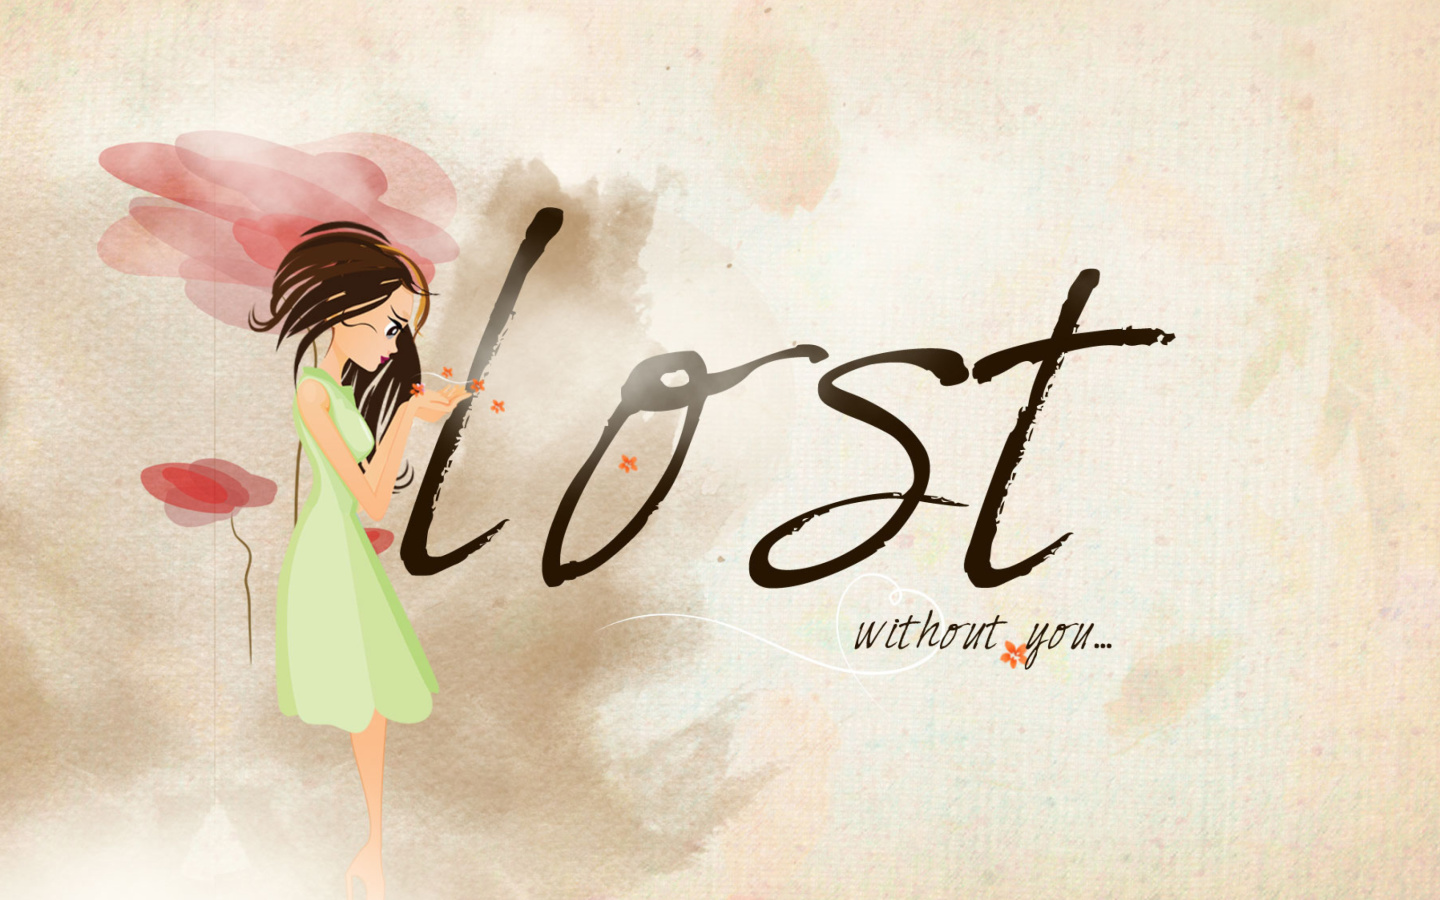 Lost Without You wallpaper 1440x900